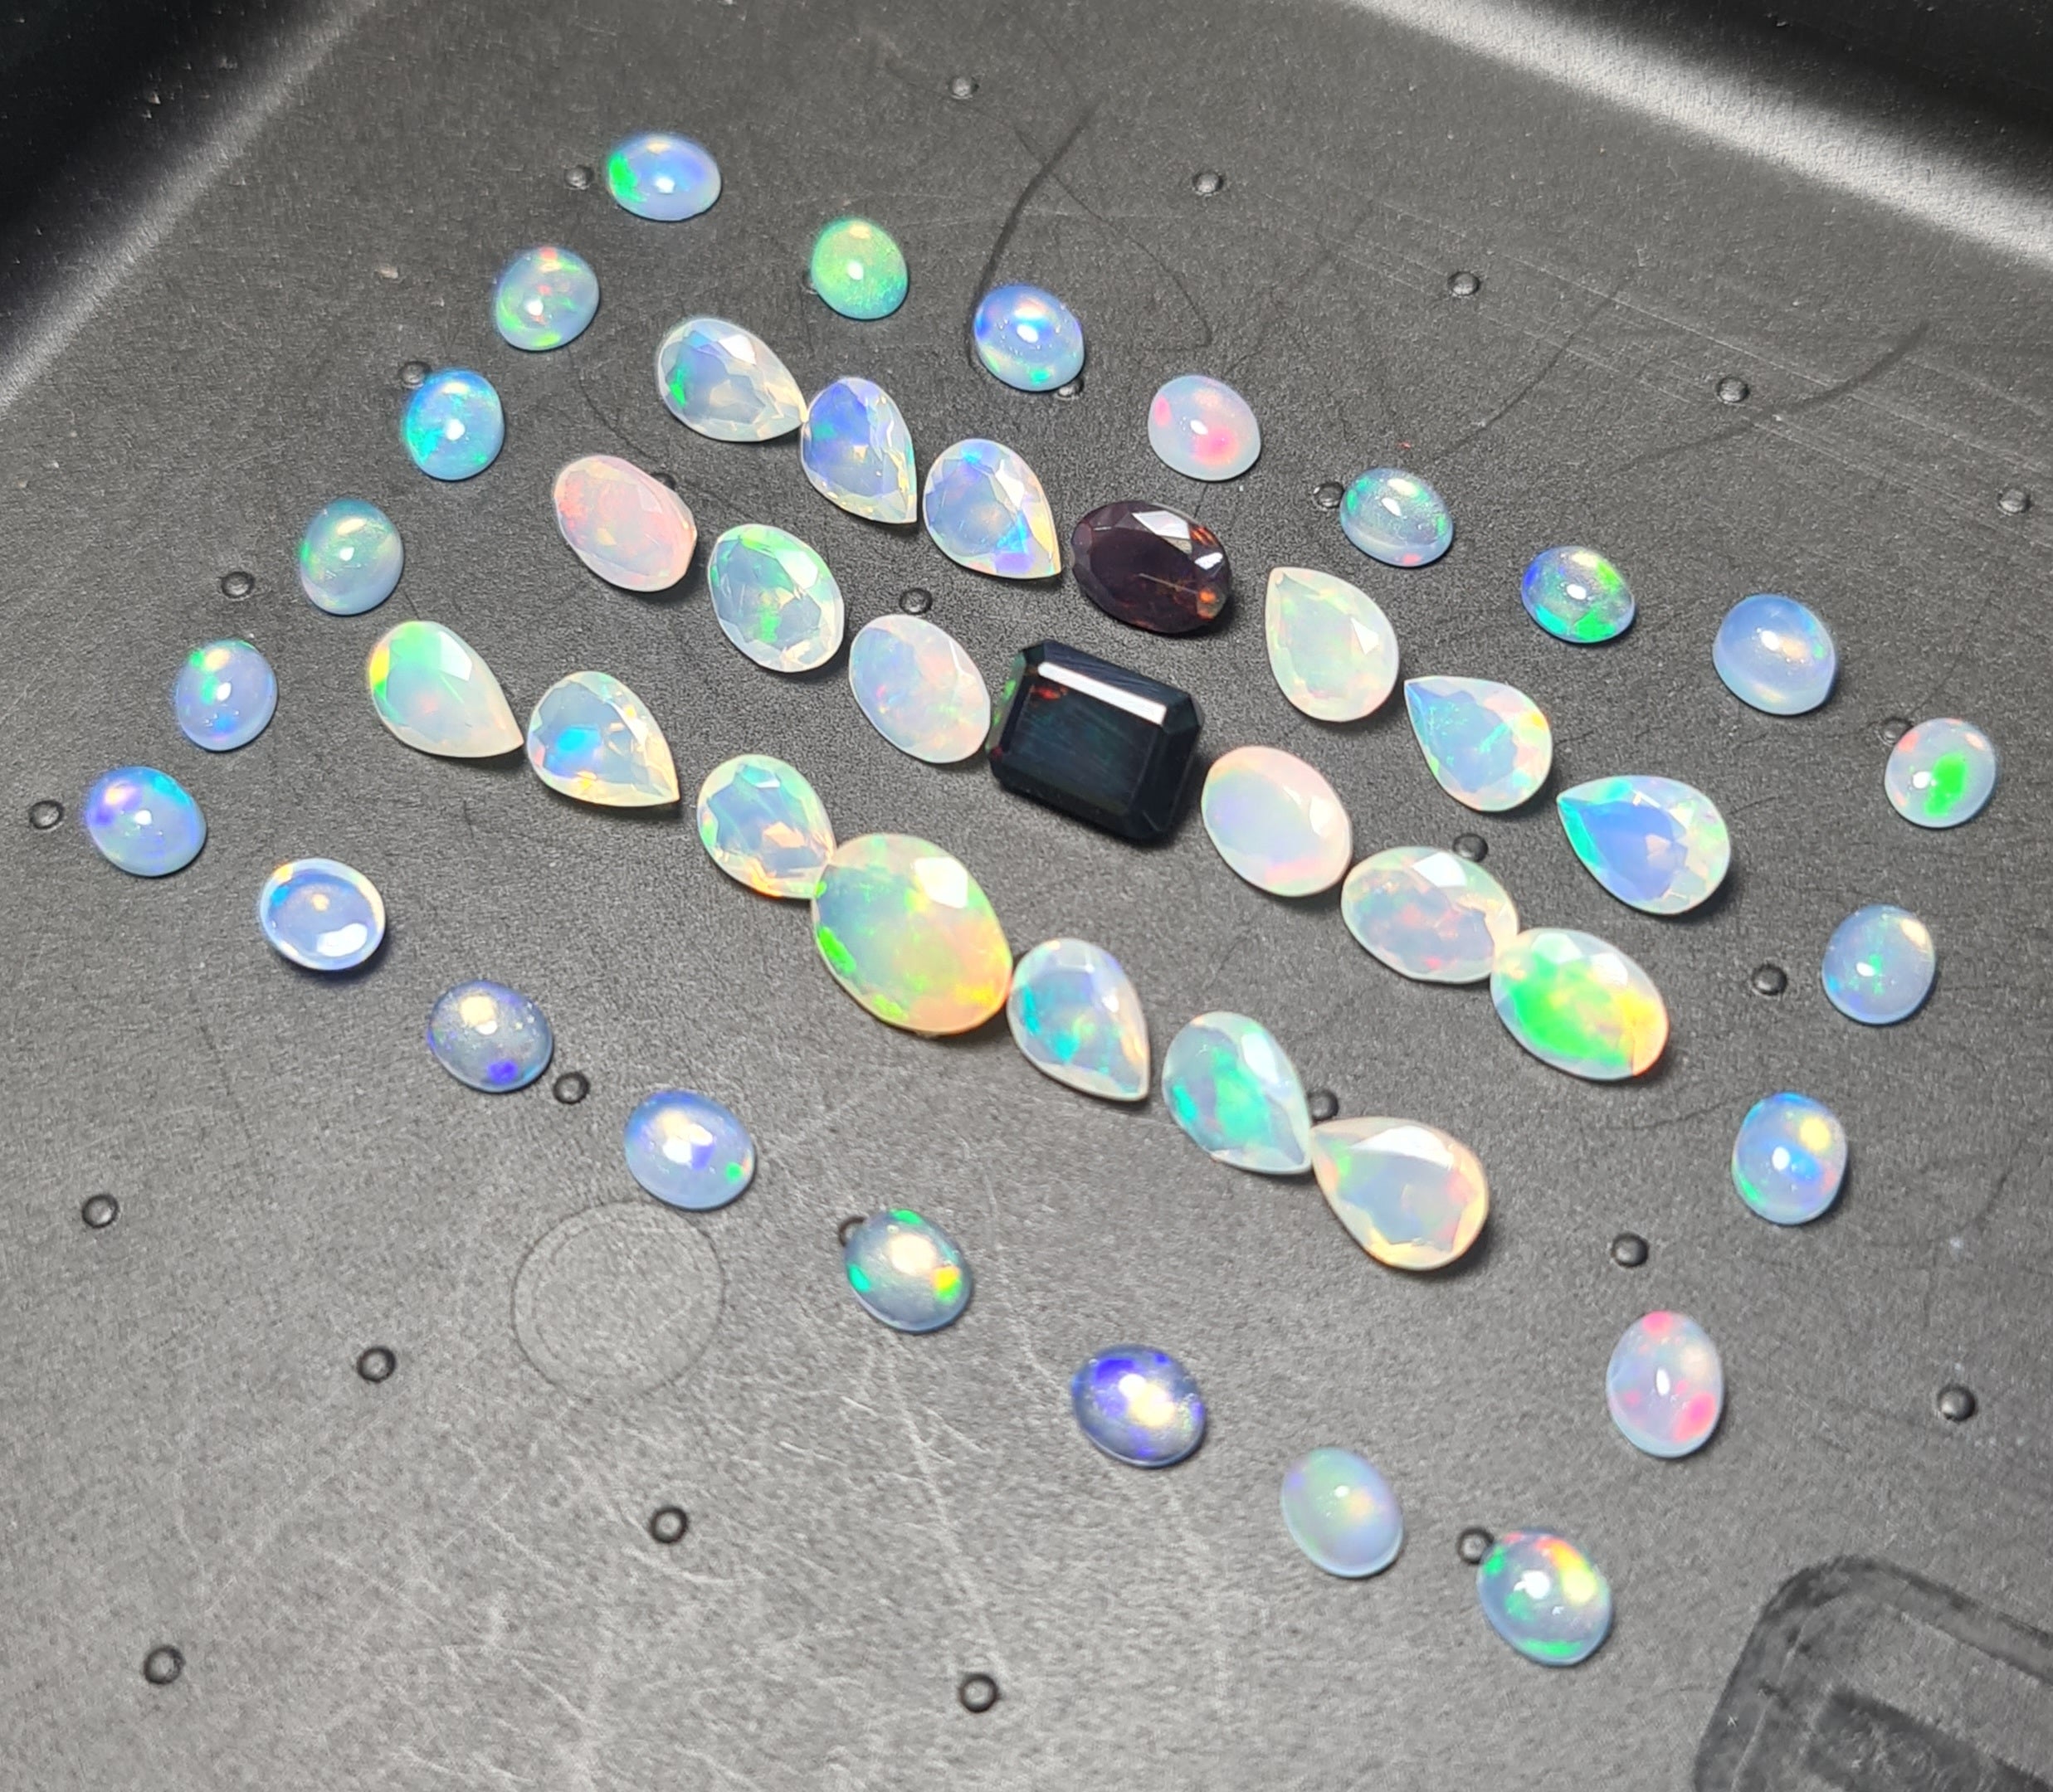 Wholesale Lot: 44 Pcs Natural Opal Faceted & Cabochon 5-9mm | 15.5Cts Approx. | Ethiopian Mined Untreated - The LabradoriteKing